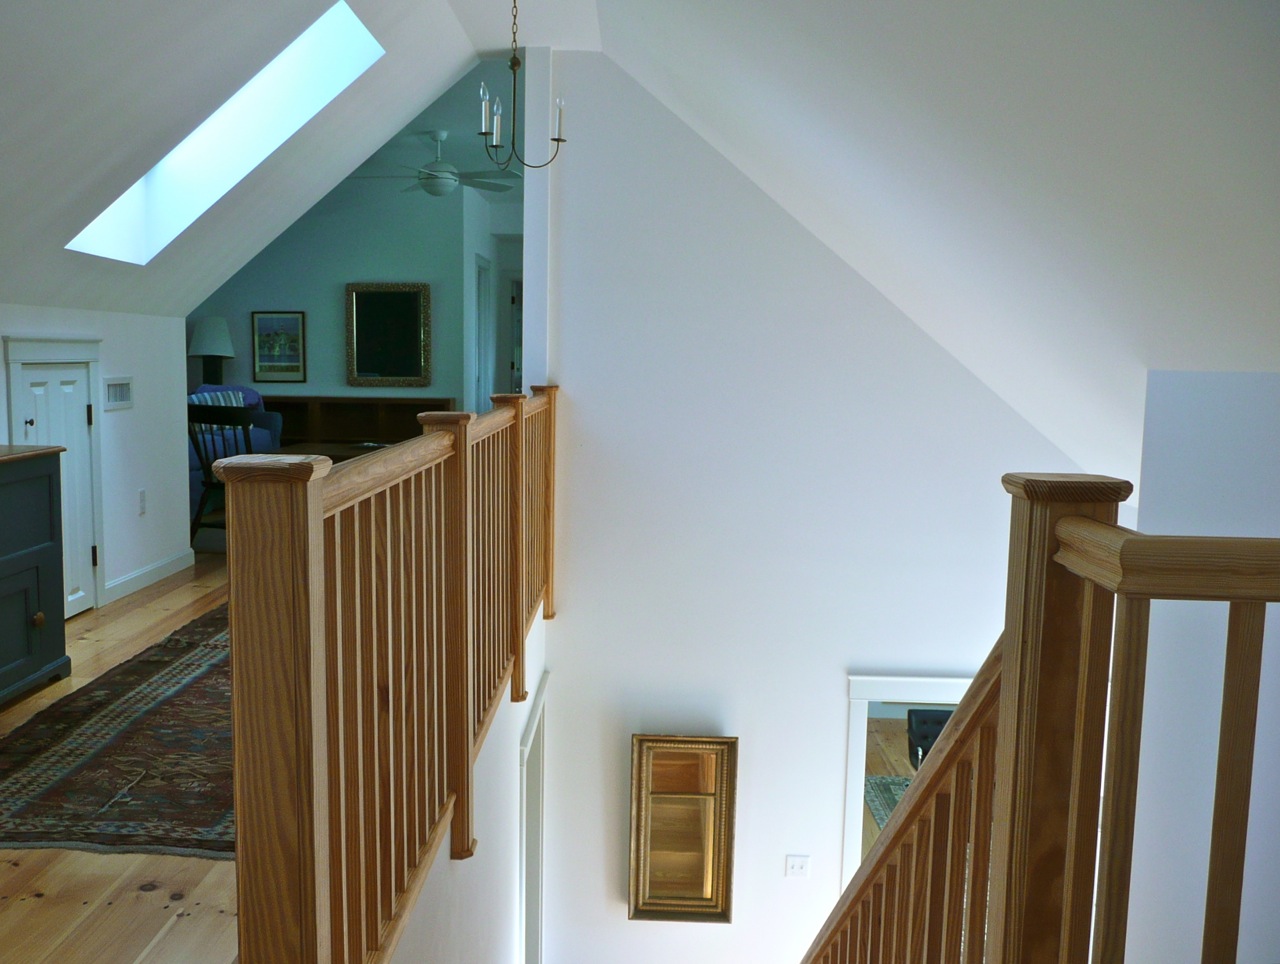 Stair and railing in Fine Homebuilding by Joseph B Lanza